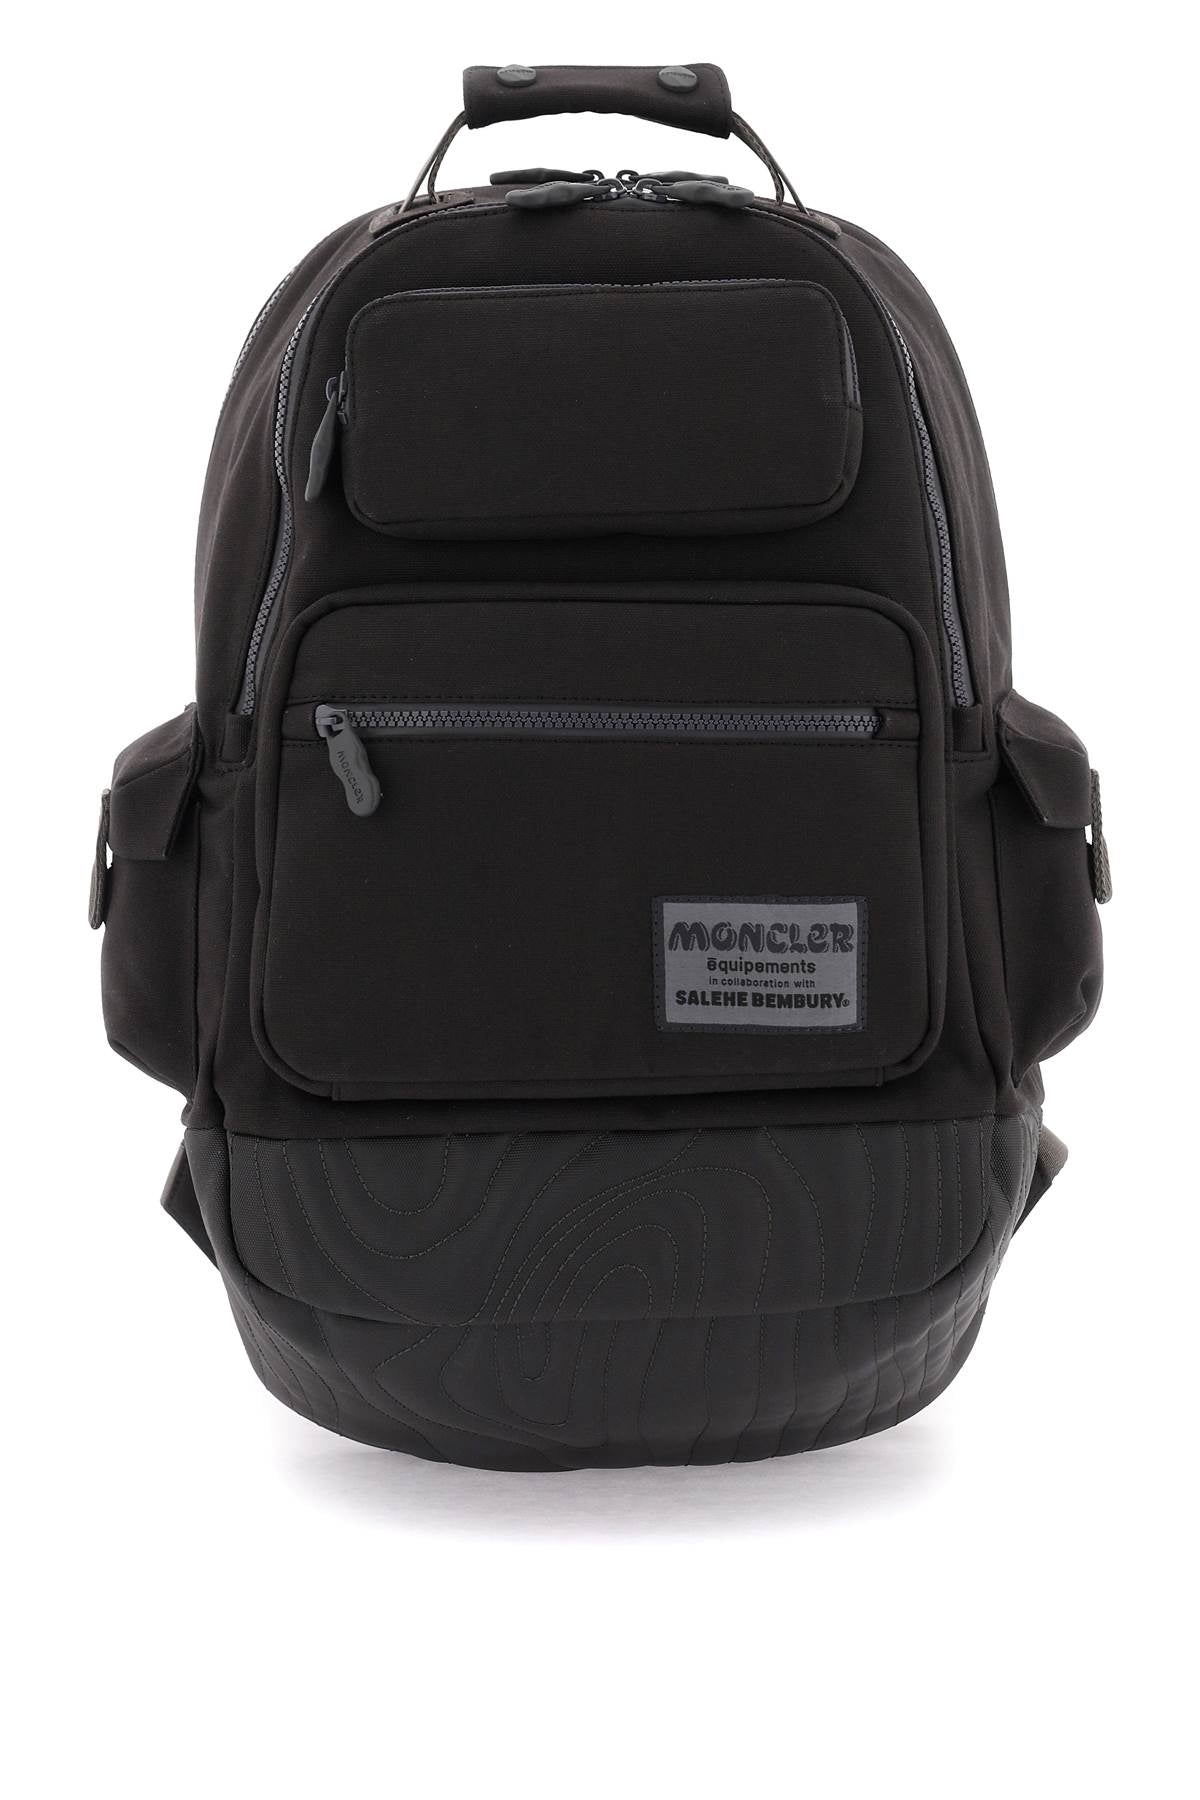 MONCLER GENIUS Black Canvas Backpack for Men with Front Zipped Pockets and Stitched Logo Patch